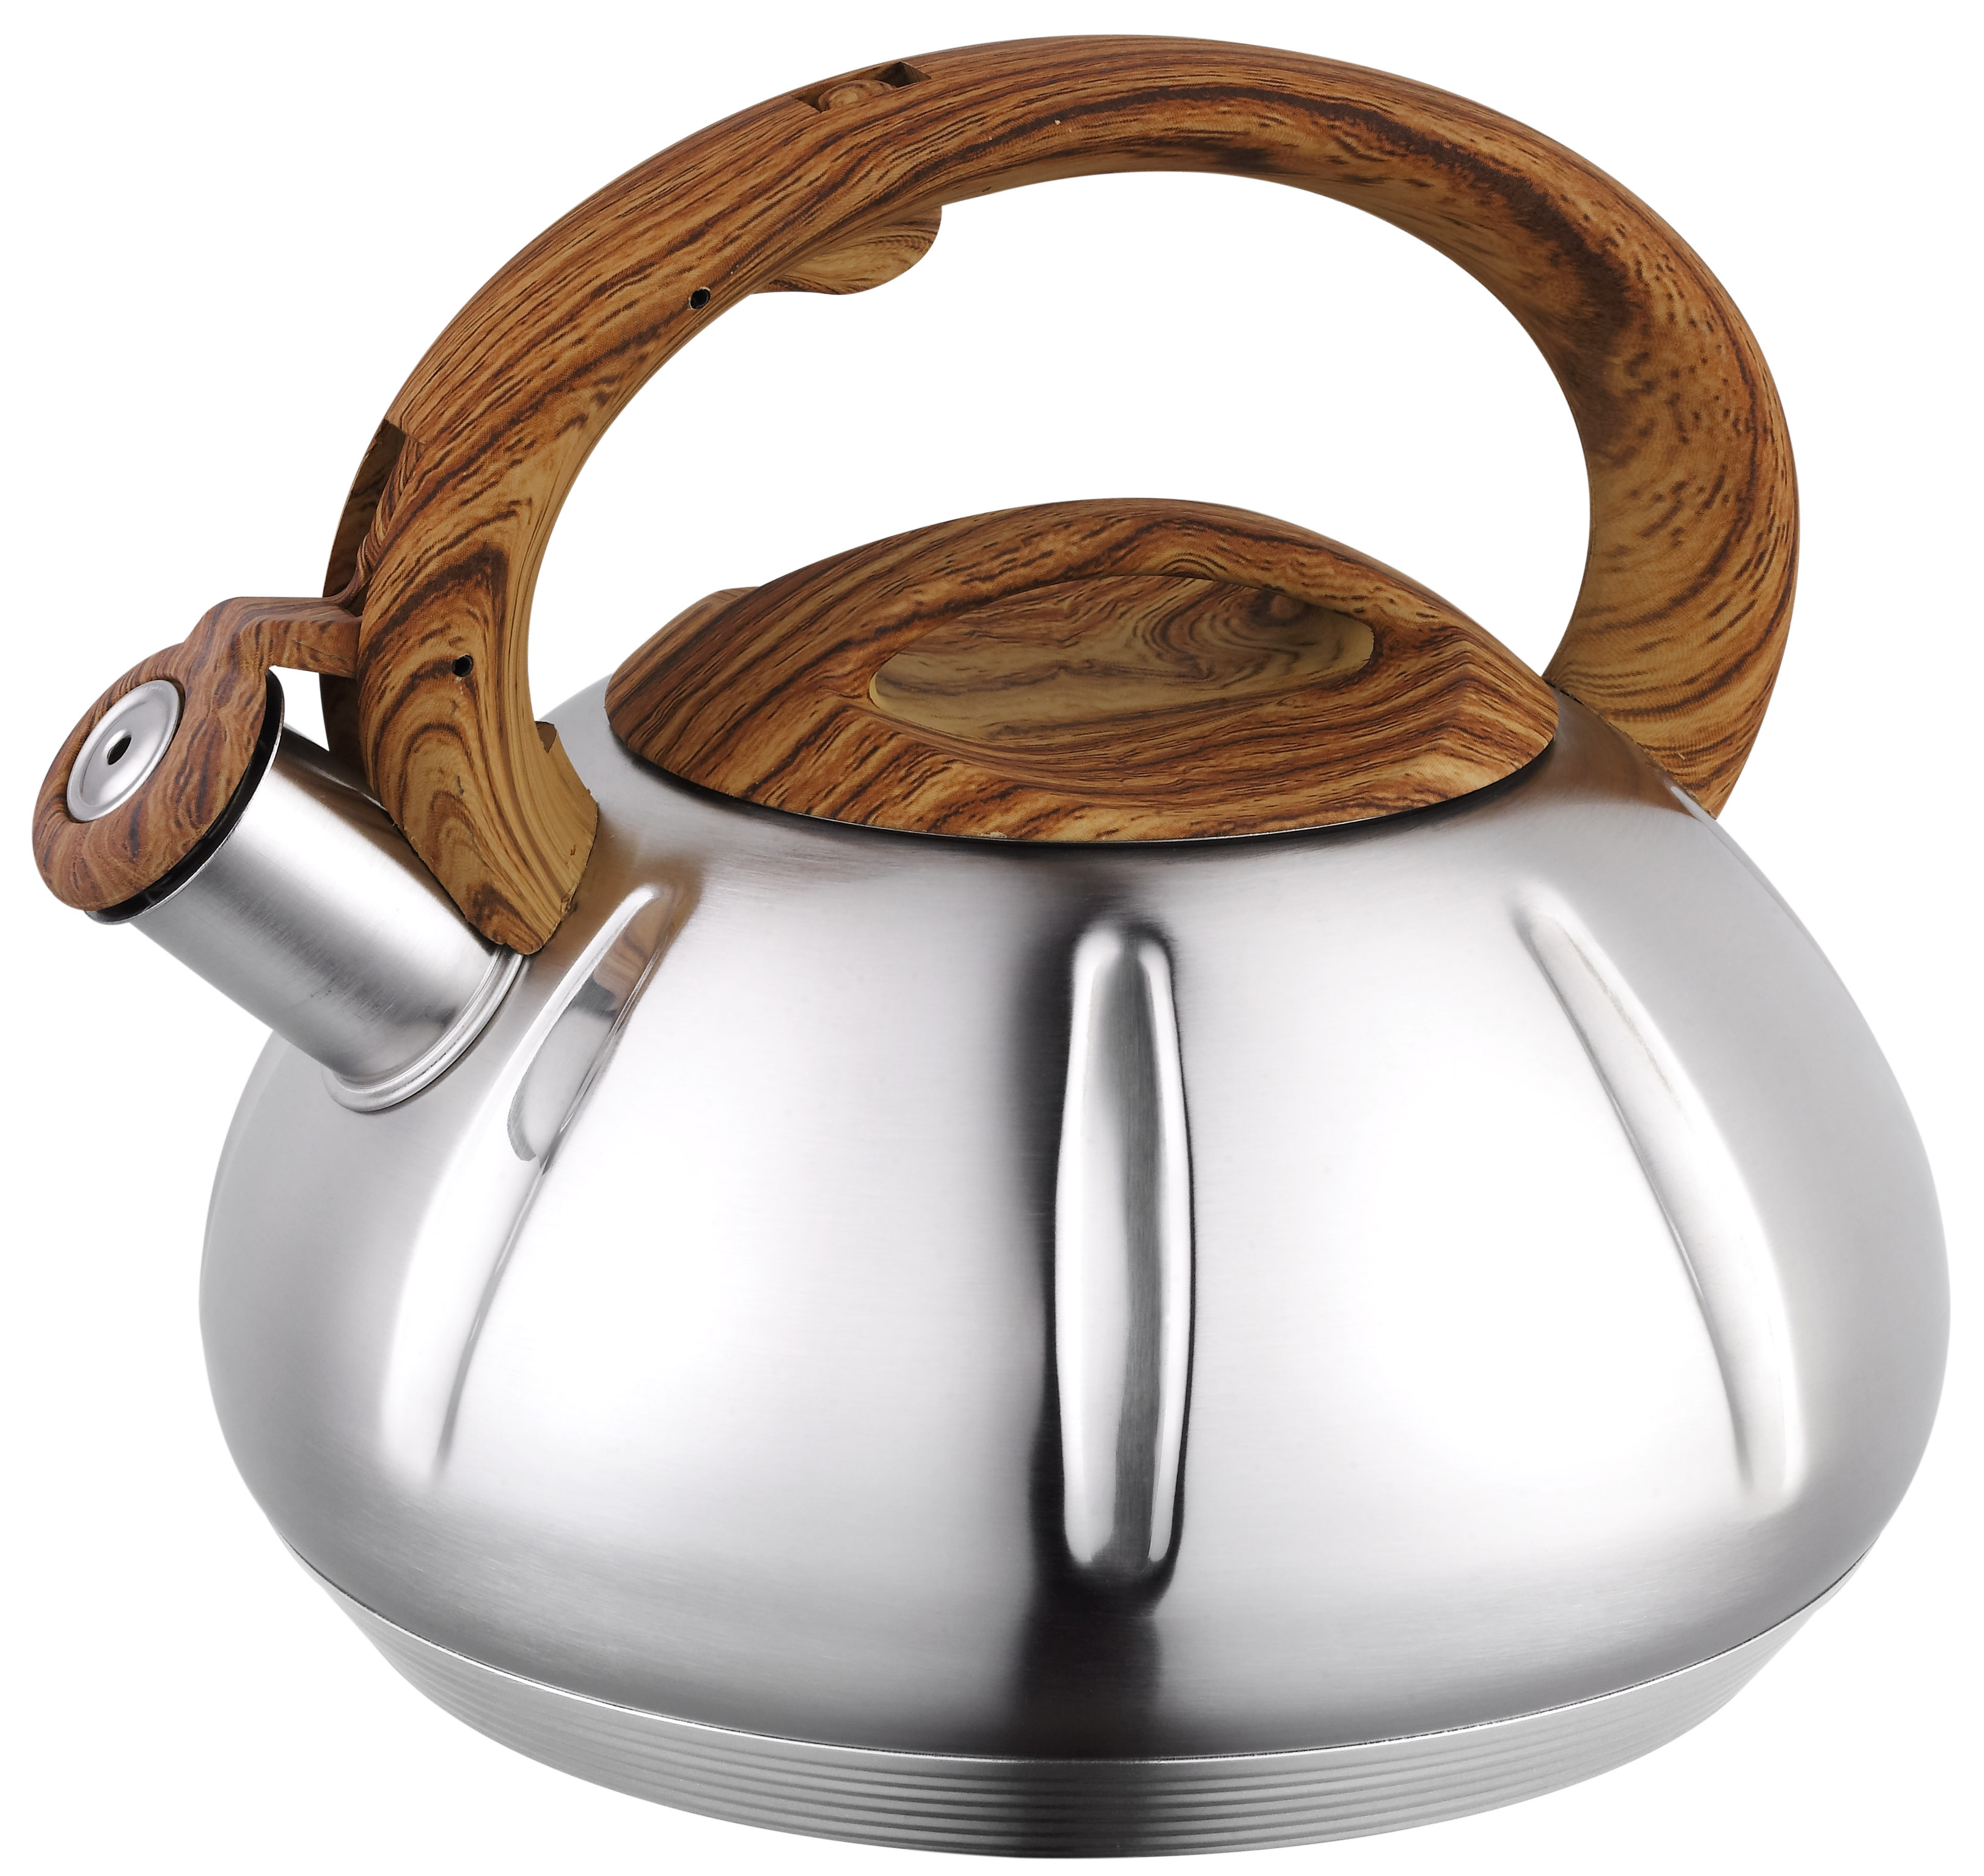 High-quality 3L Whistling Tea Kettle Stainless Steel The Whistling Kettle 